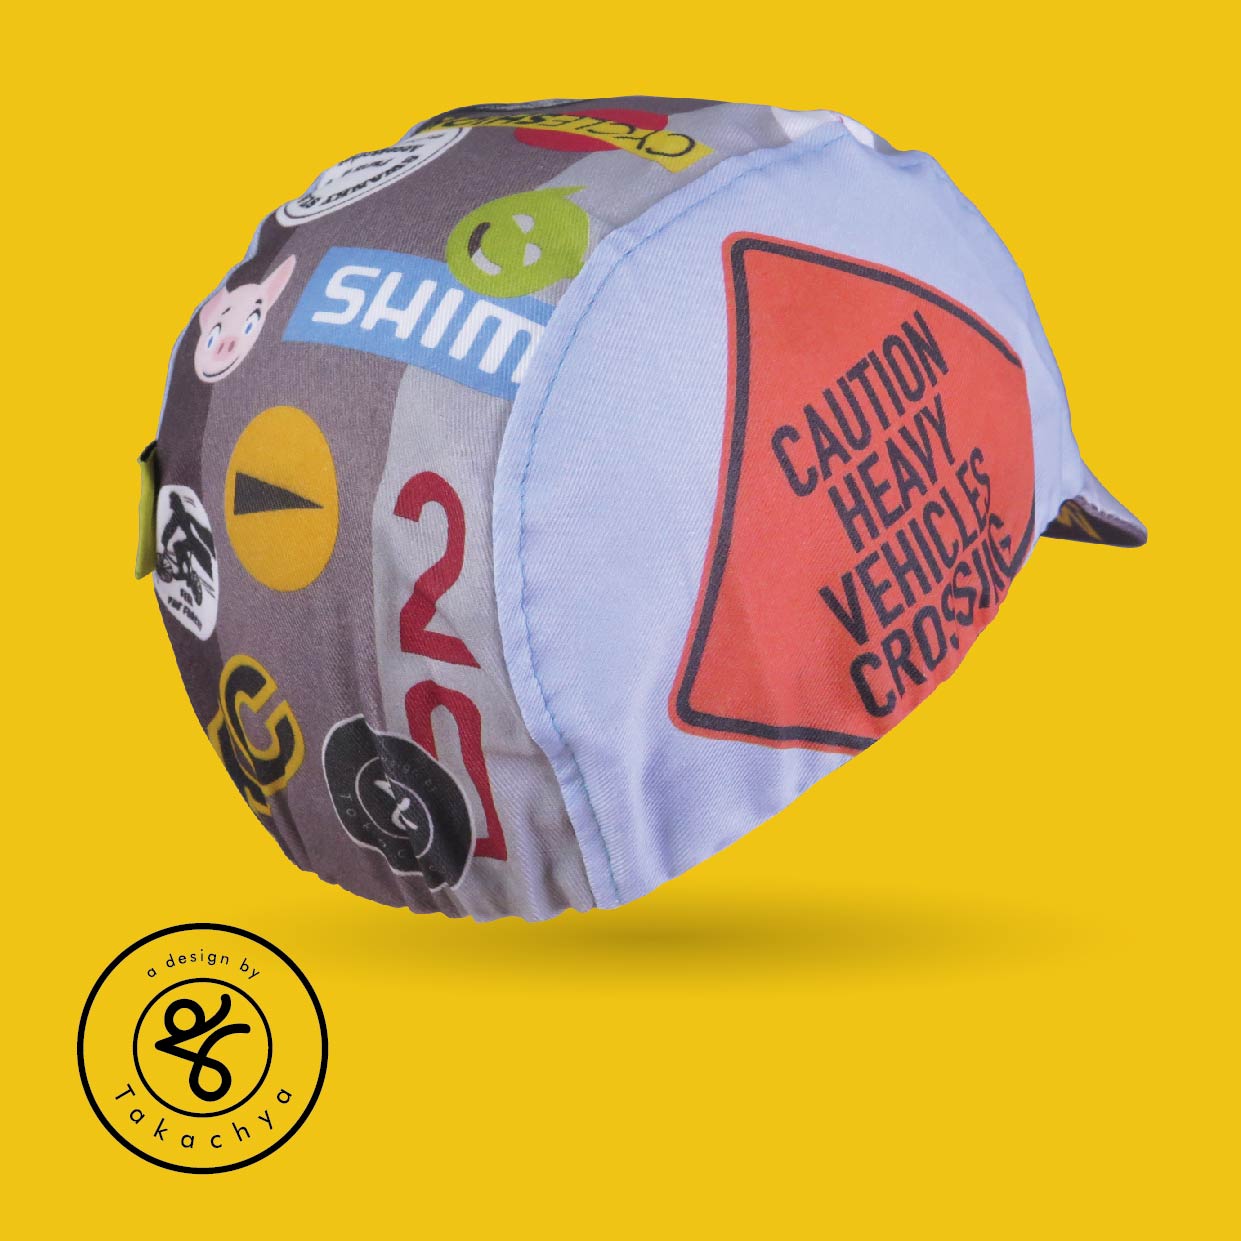 Mission To Tuas - Full Color - A Design by Takachya Cycling Cap